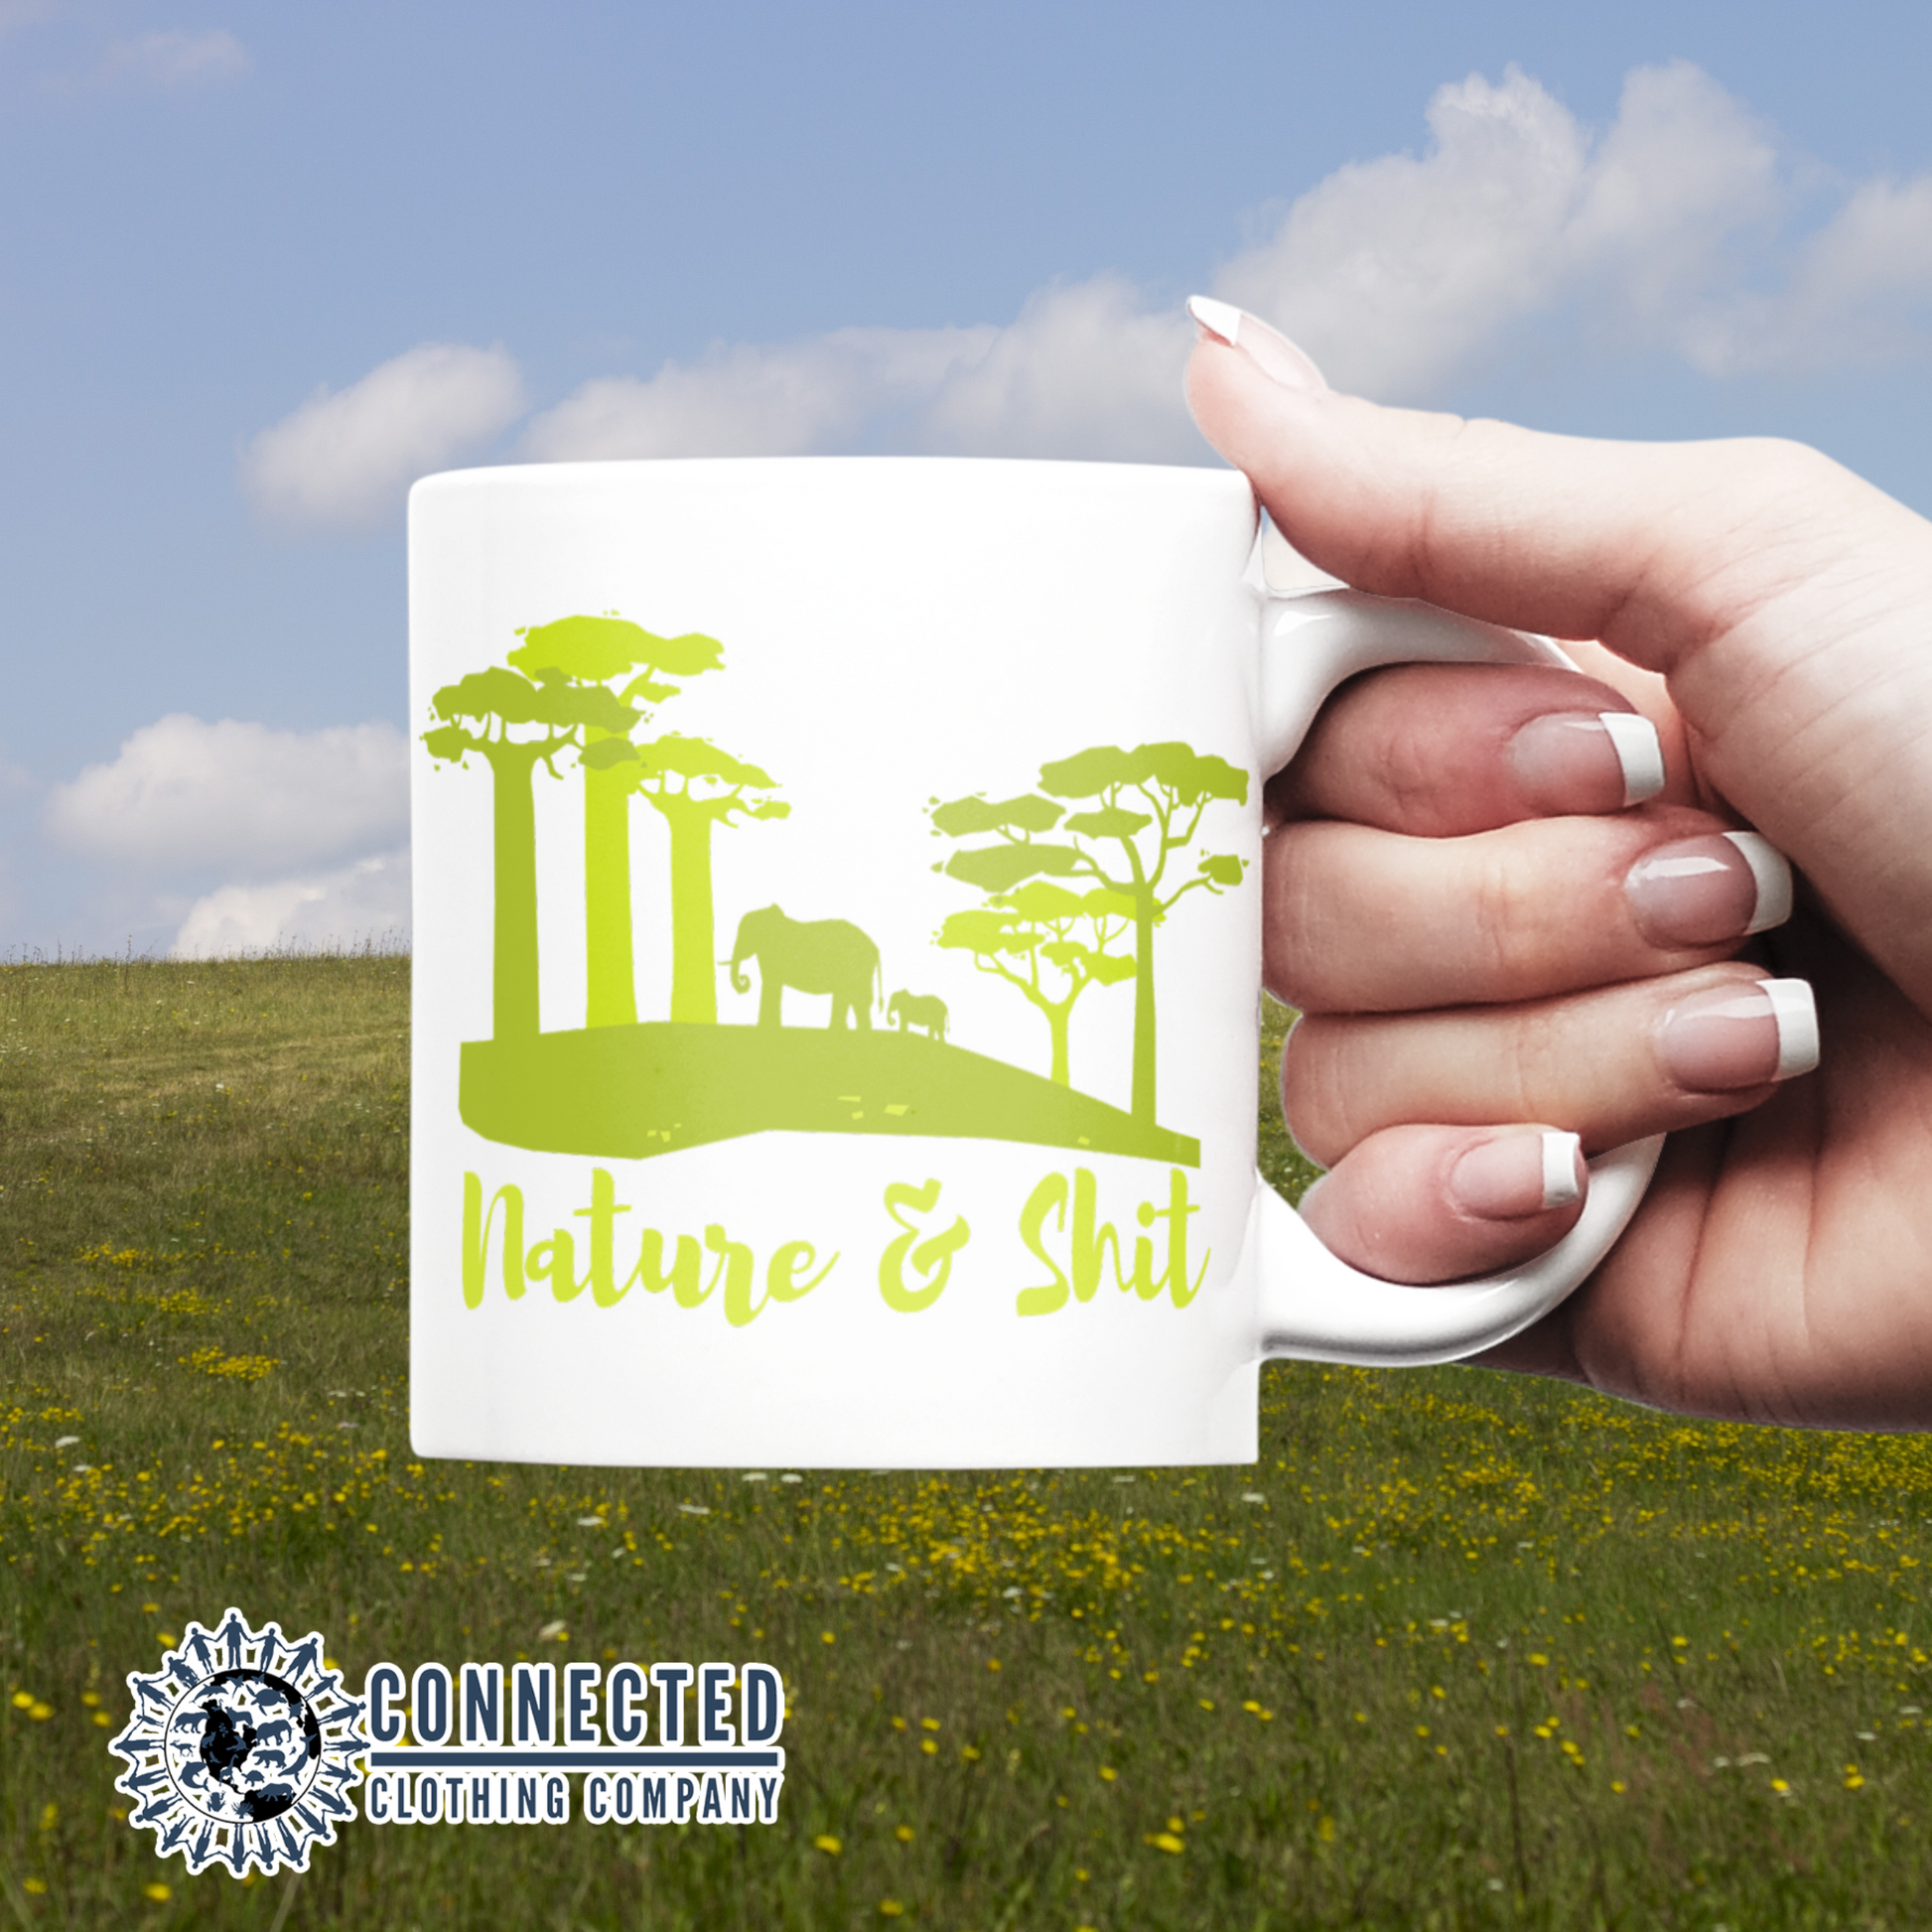 Nature and Shit Coffee Mug - Connected Clothing Company - 10% of proceeds donated to wildlife conservation